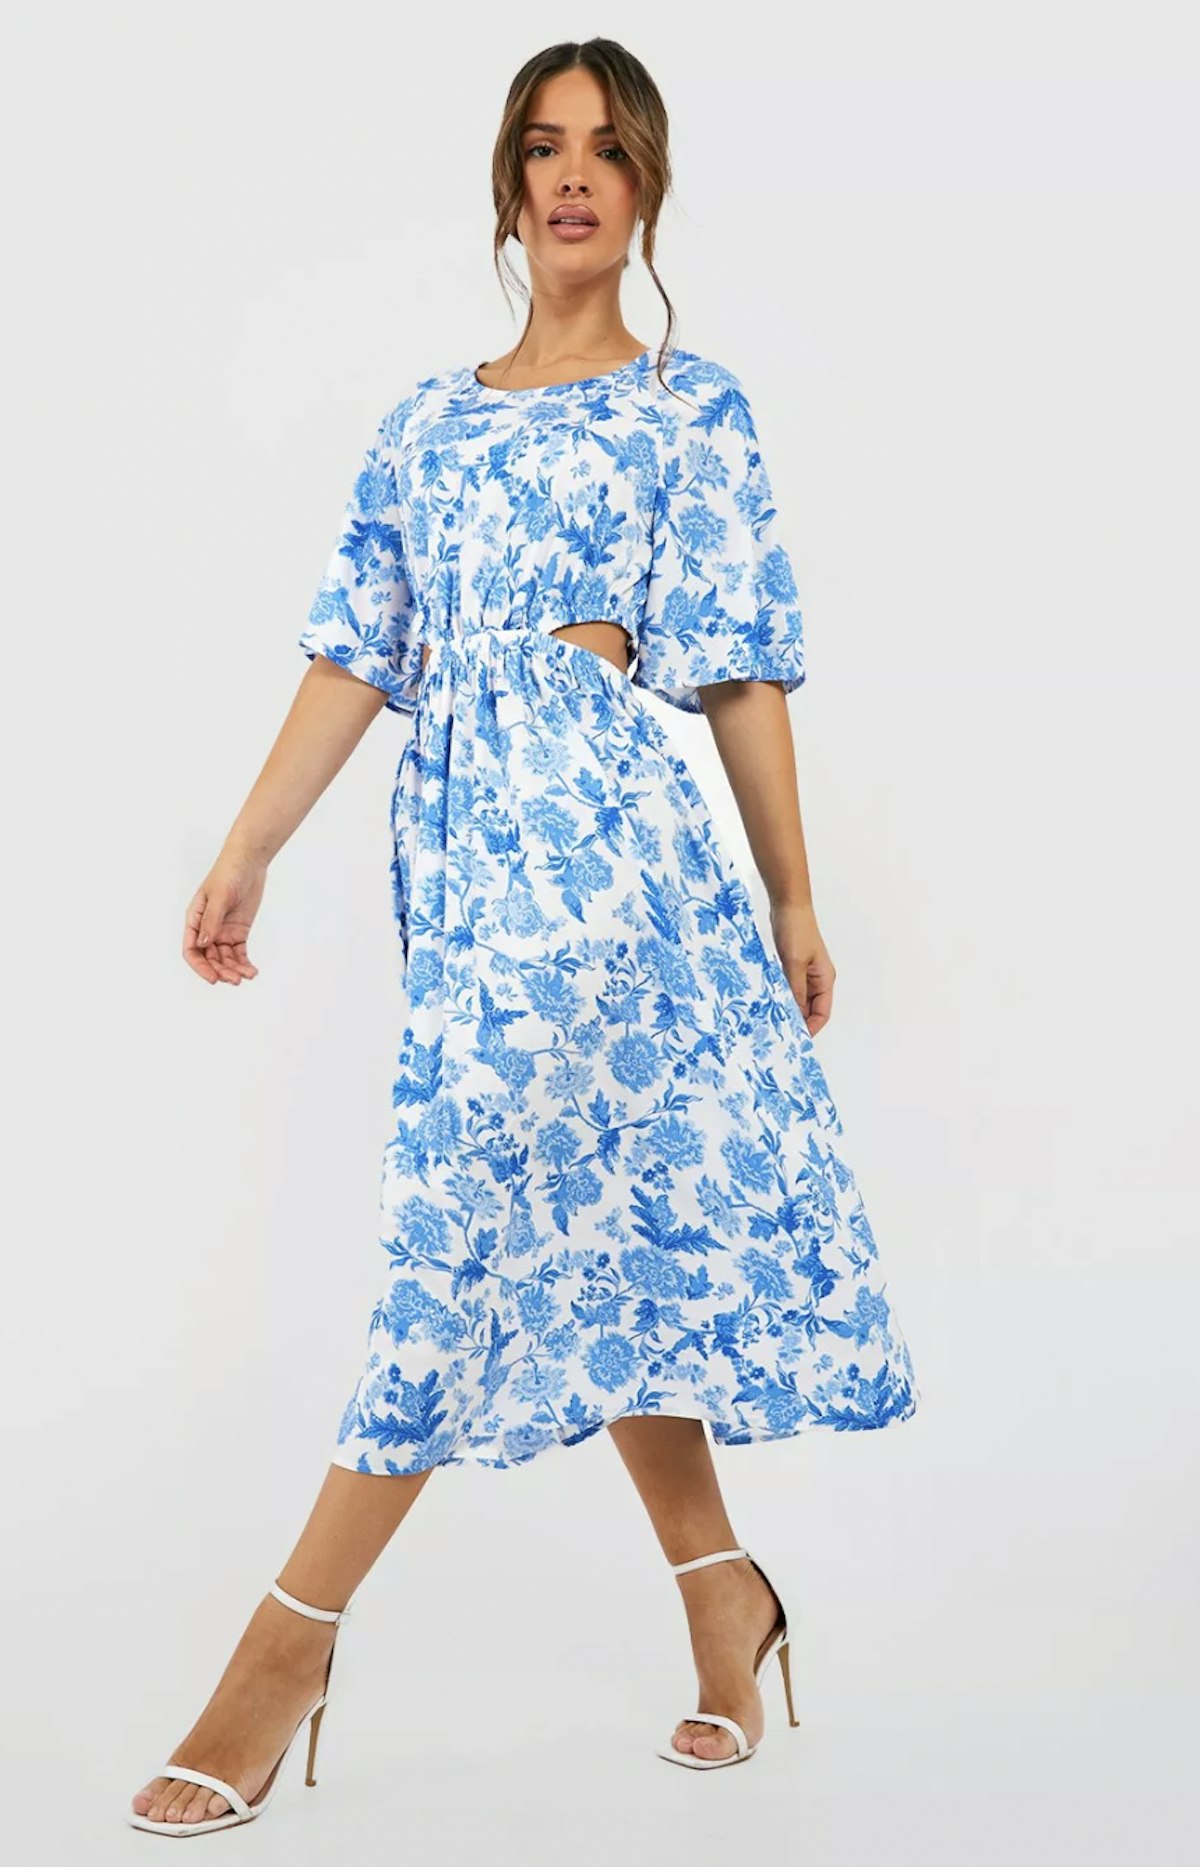 Best Midi Dresses For Women 2023: From ASOS to New Look